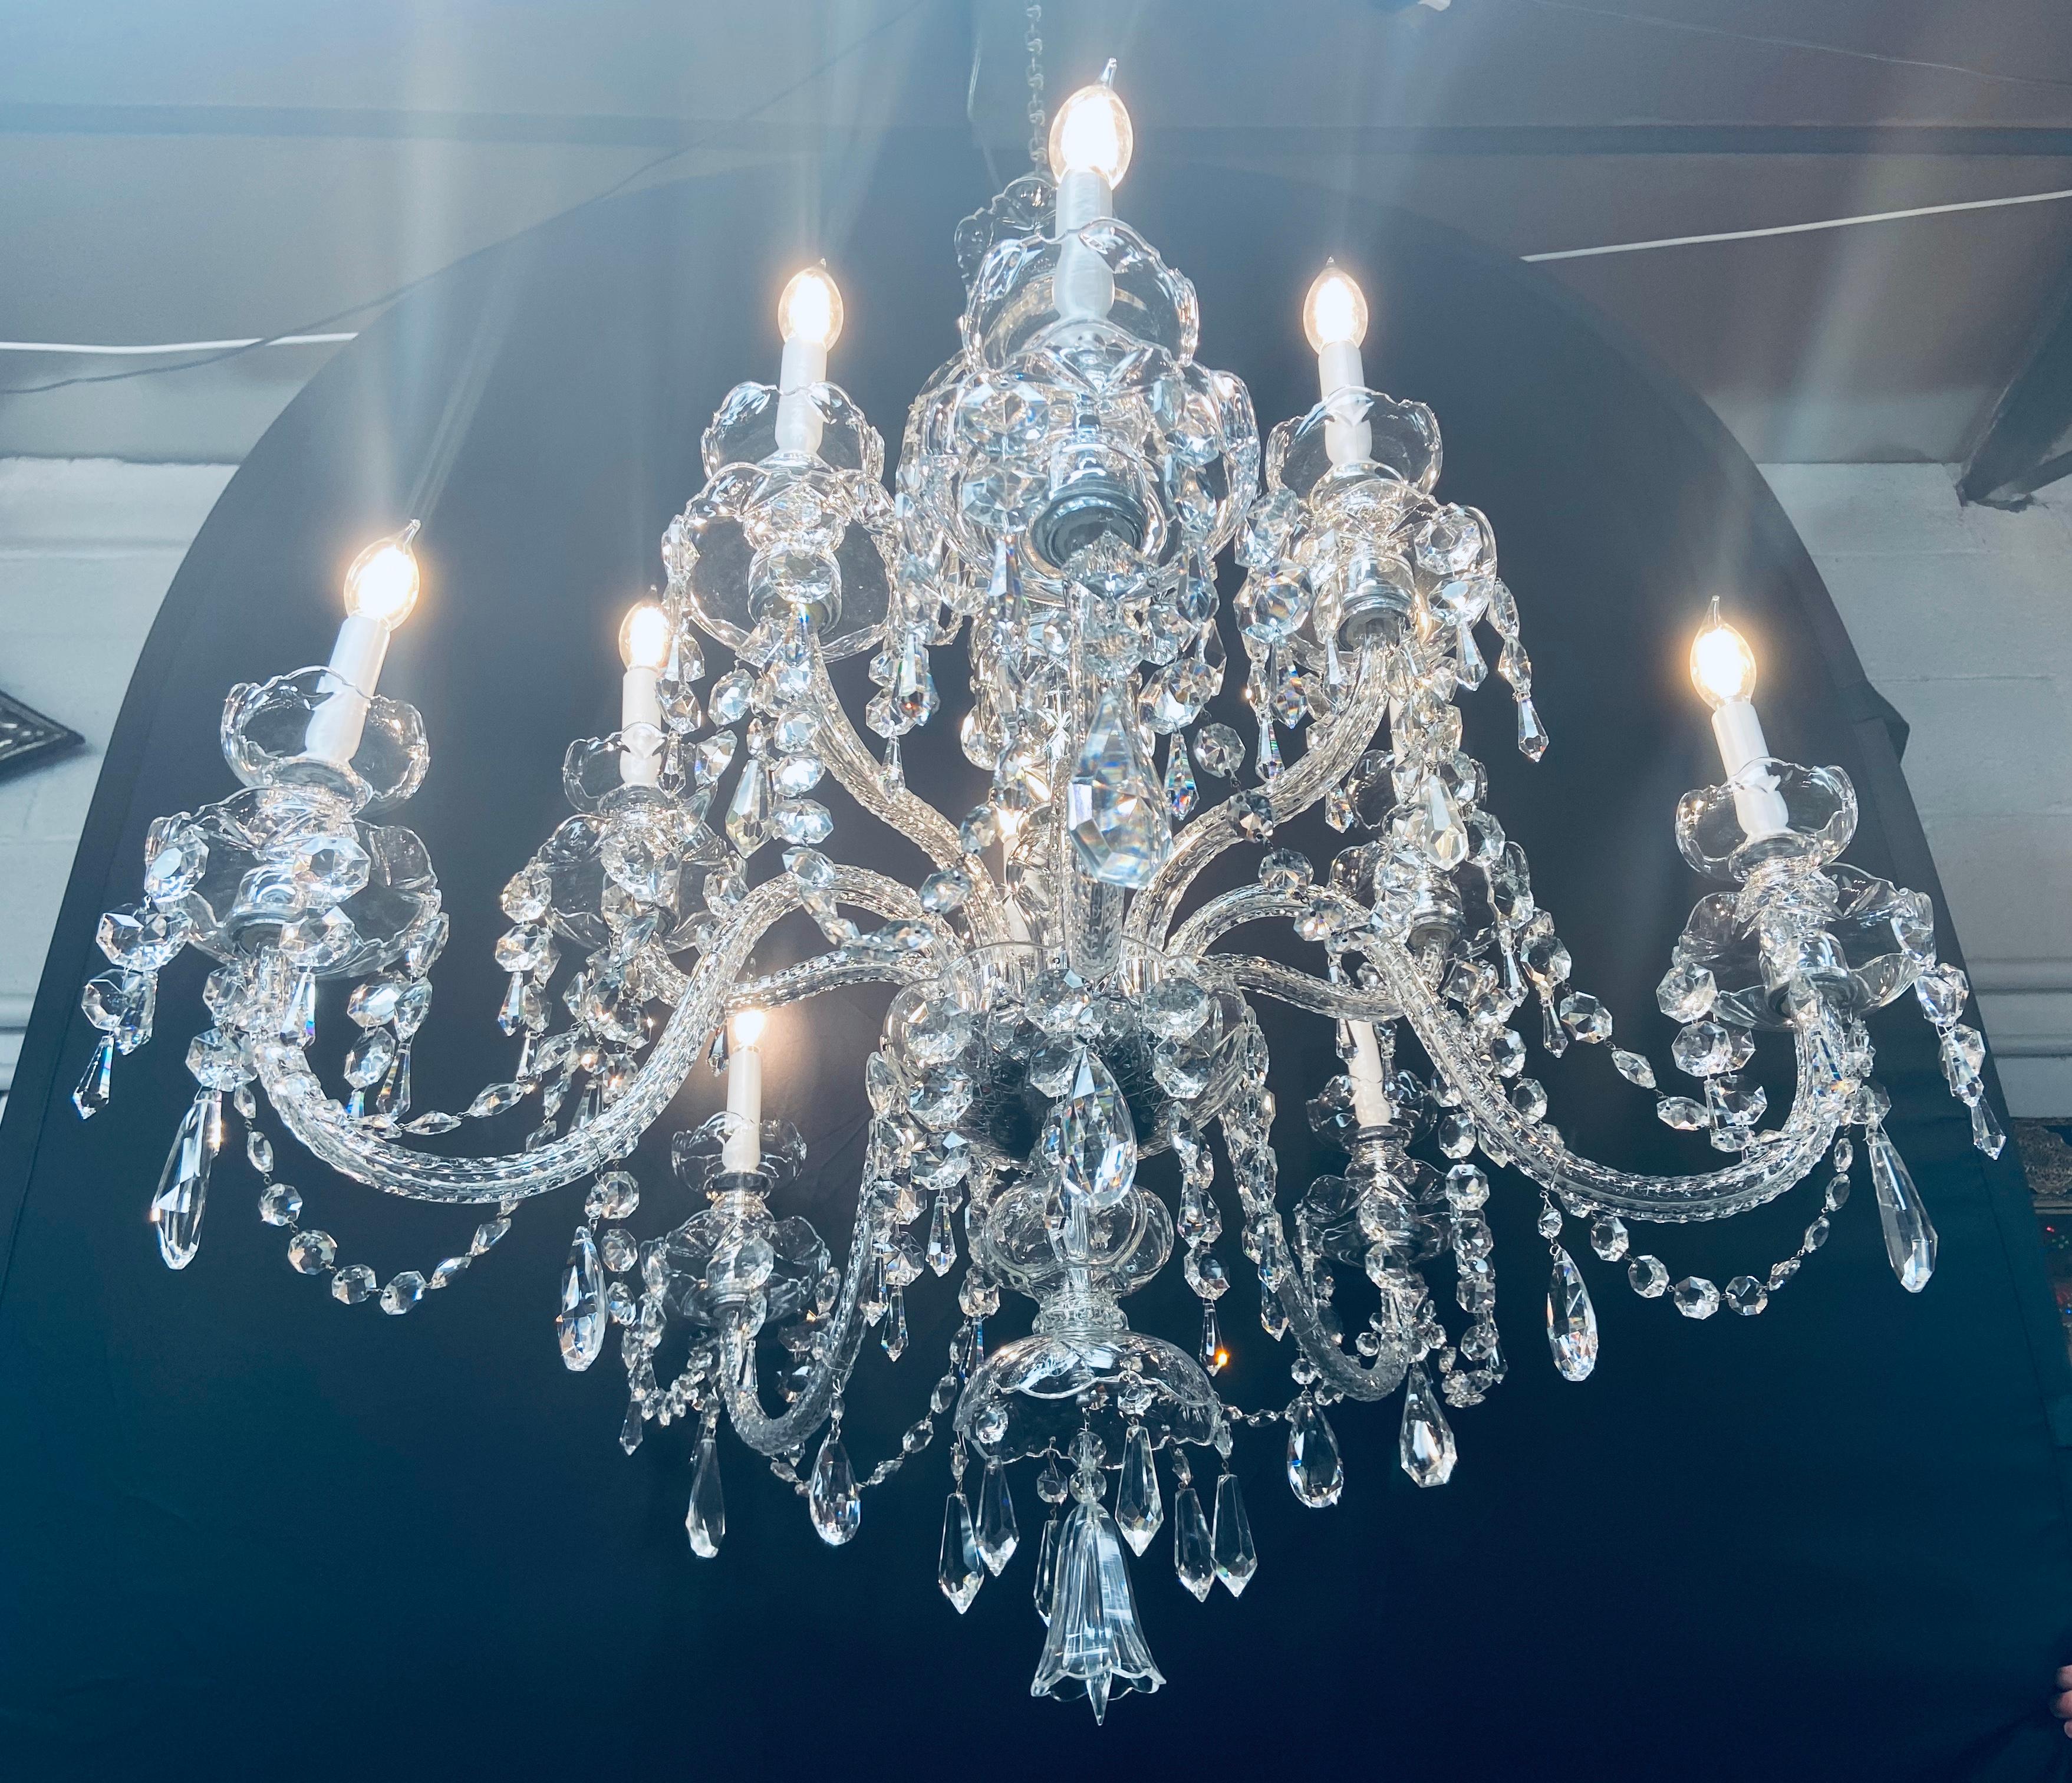 A stunning large crystal chandelier in the manner of Waterford. The chandelier features 10 arms and take 10 candelabra bulbs. The finely cut crystal prisms hang from a double bobeche candle drip. This chandelier will undoubtedly add class and